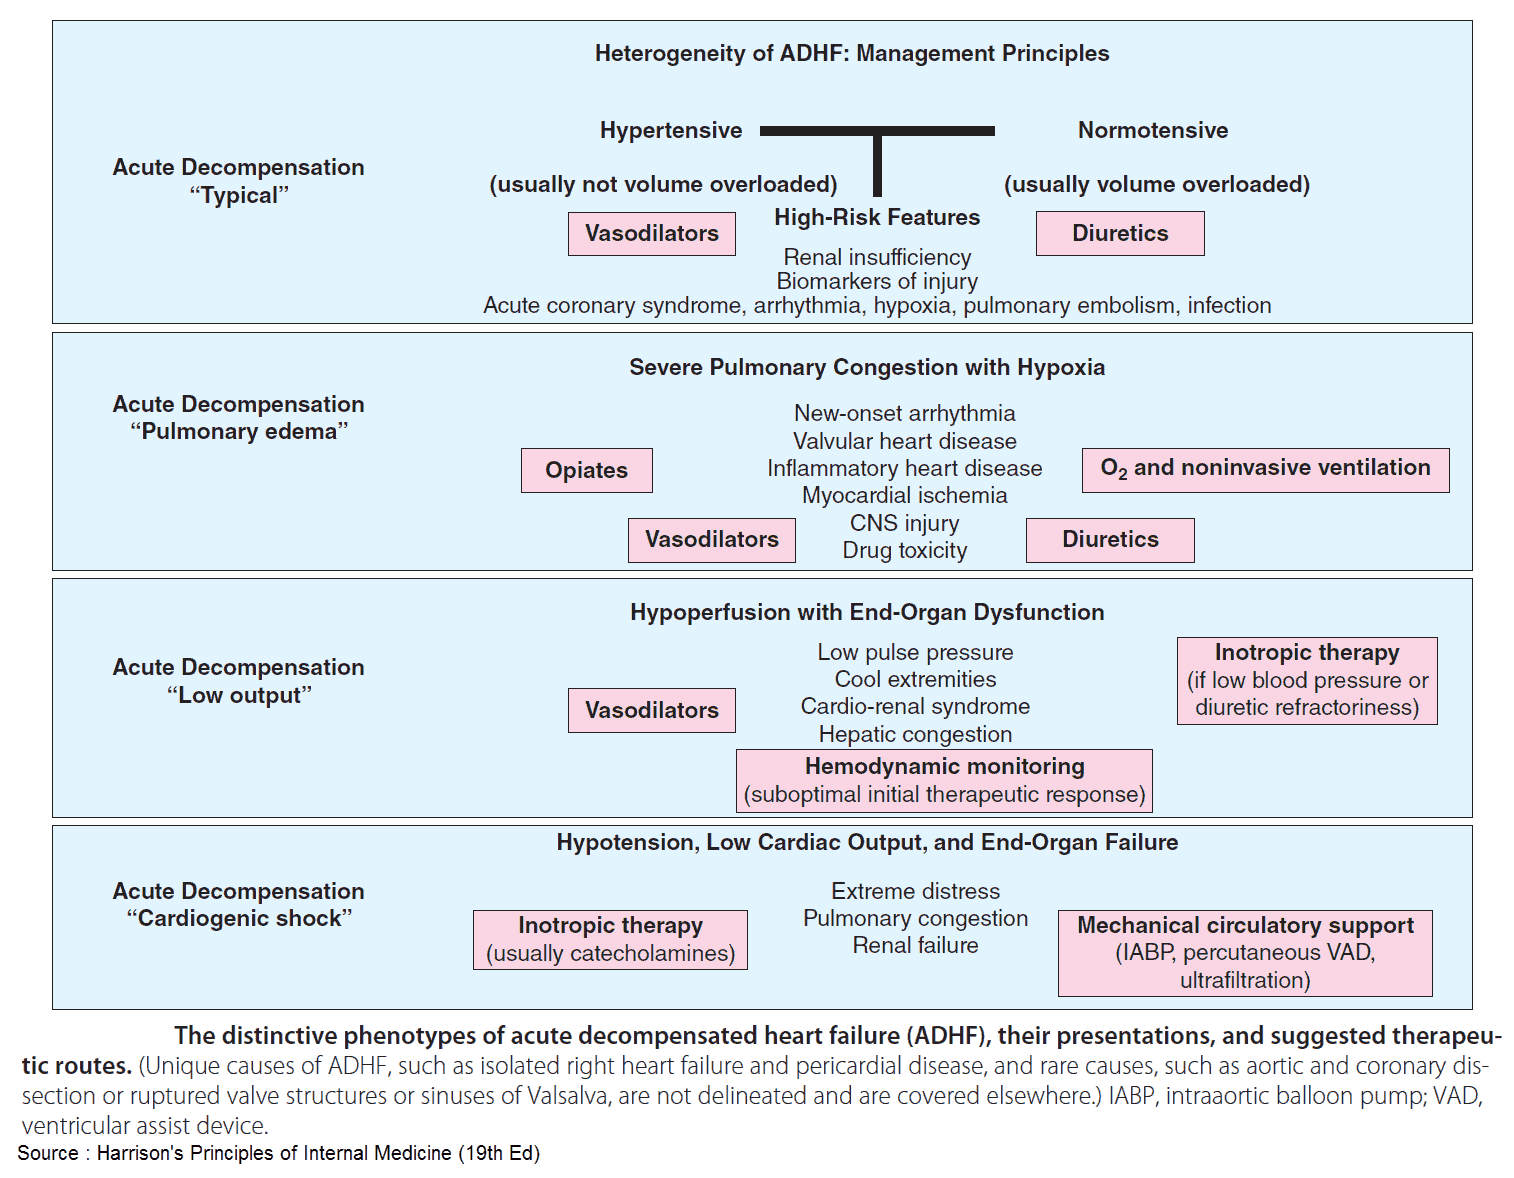 The distinctive phenotypes of acute decompensated heart failure (ADHF), their presentations, and suggested therapeutic